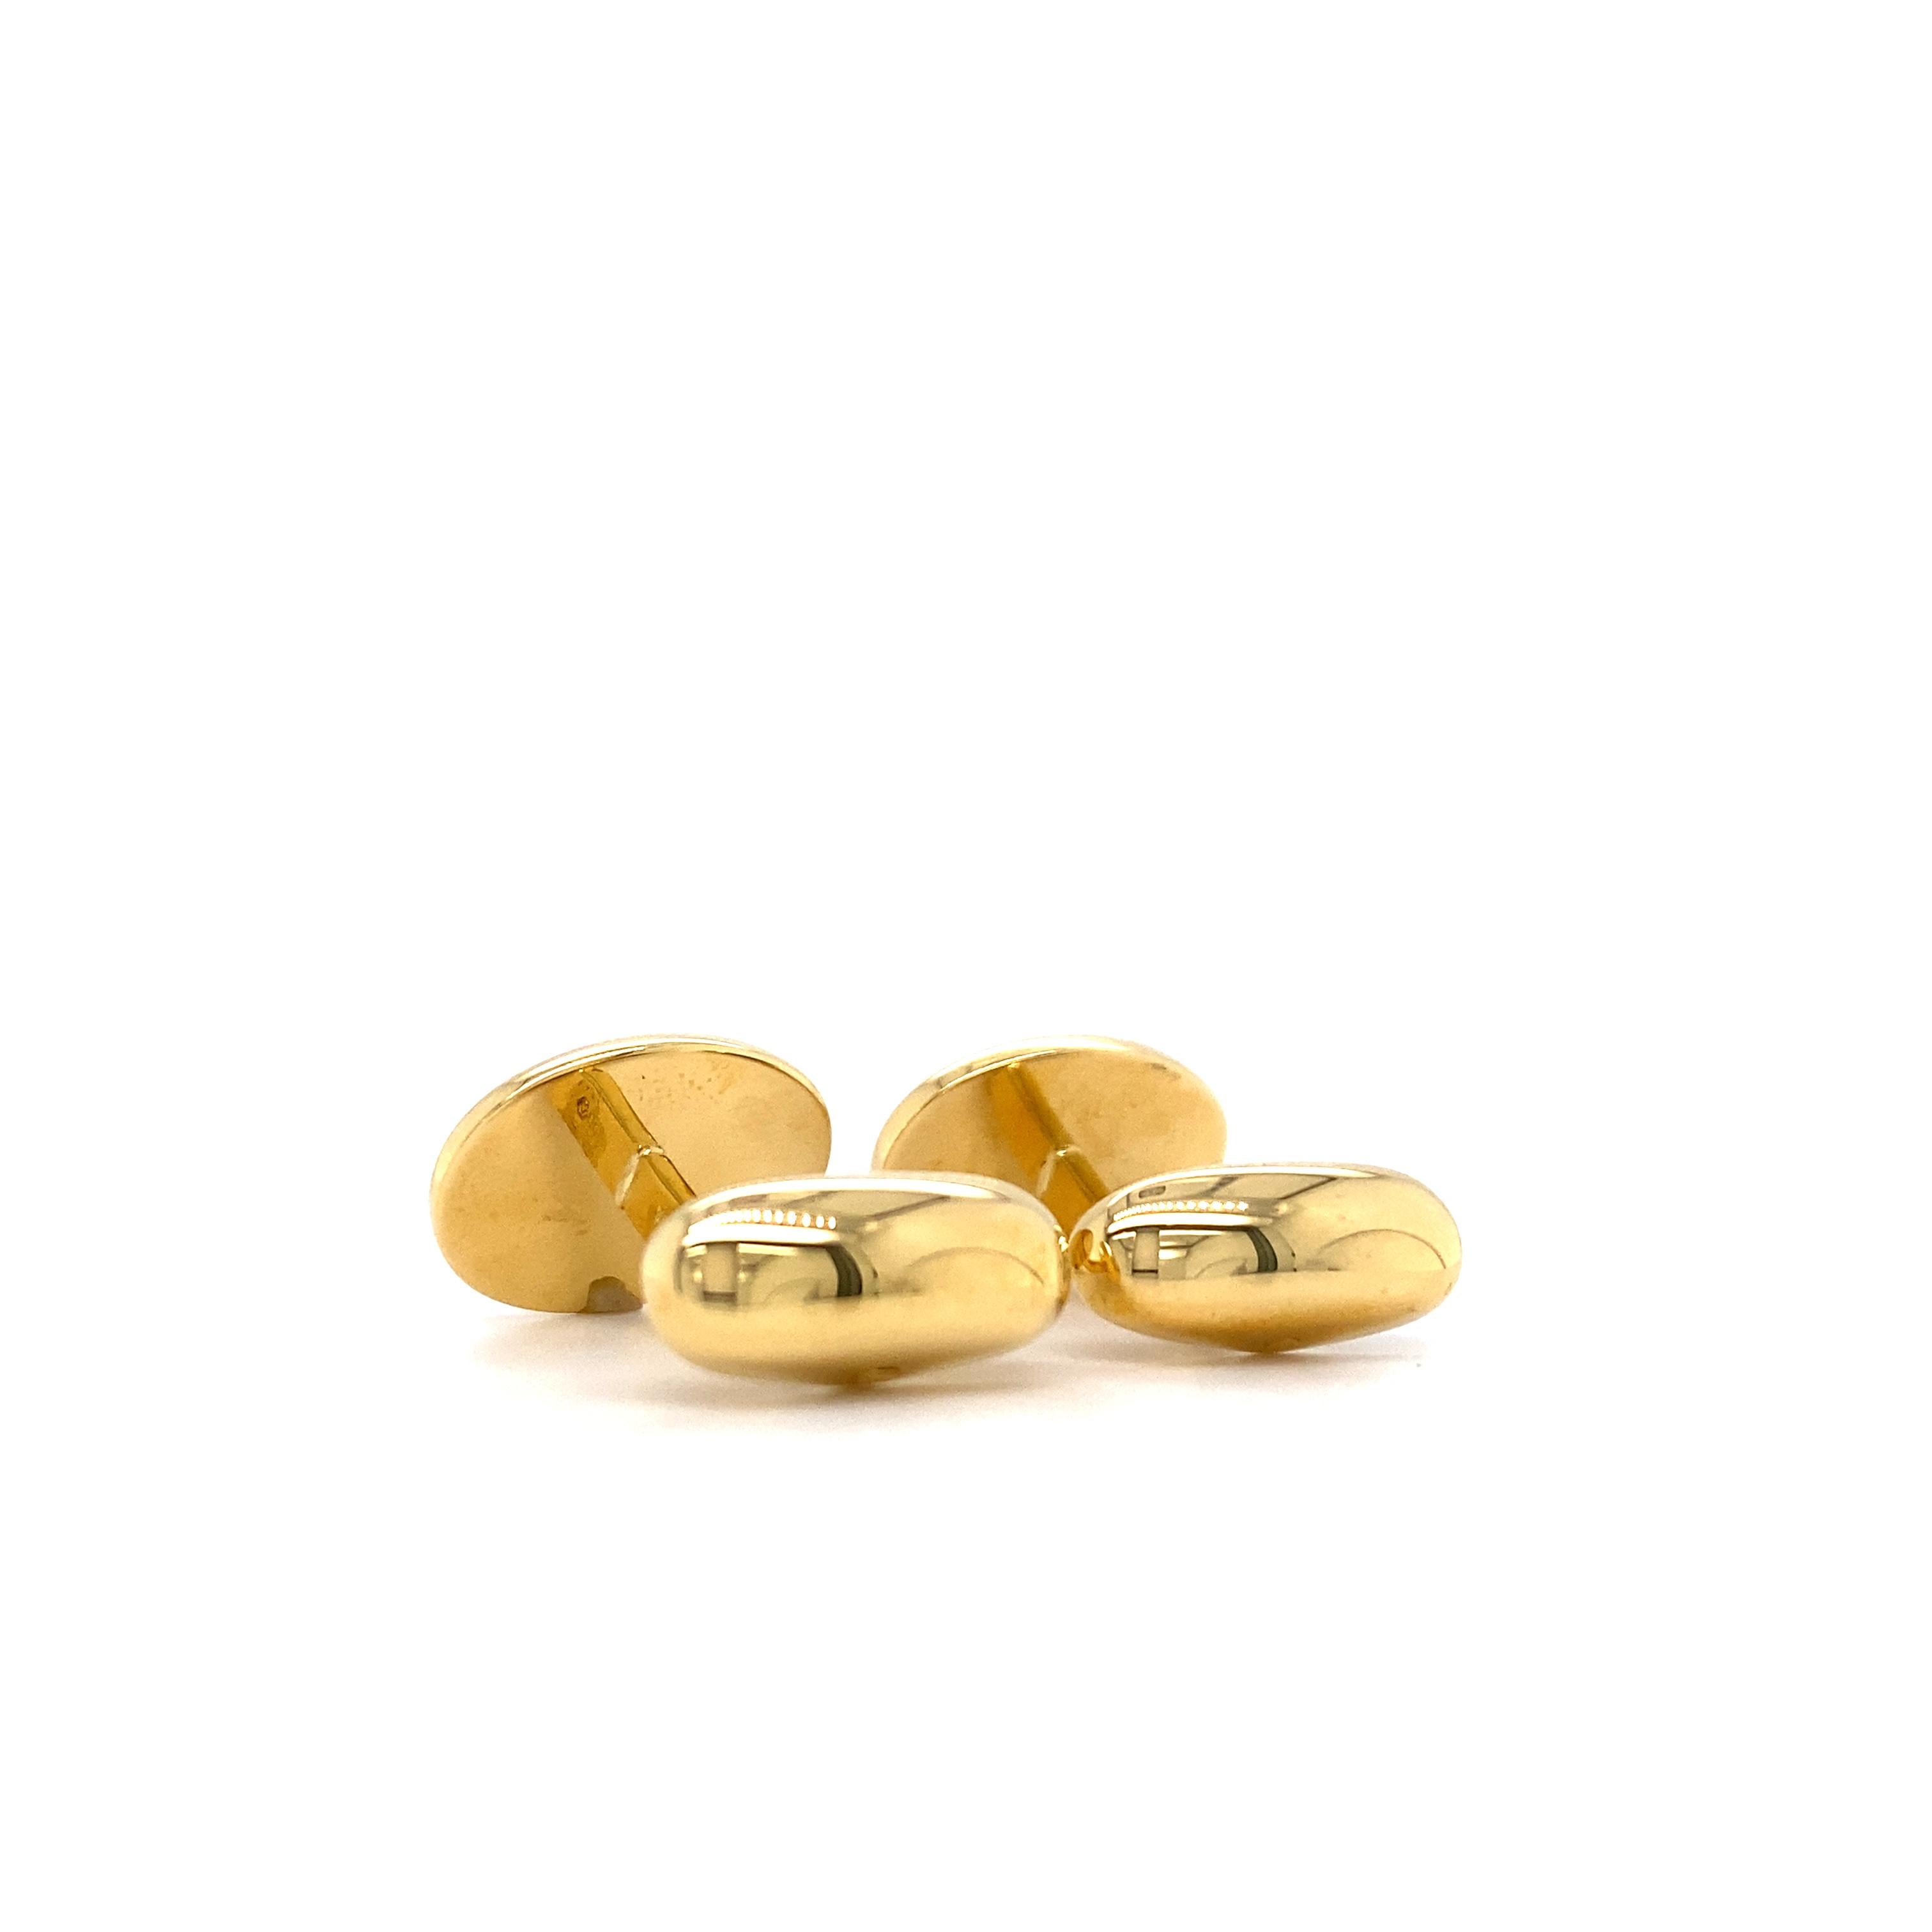 Cabochon Oval Cufflinks - 18k Yellow Gold - White Mother of Pearl Inlays - 12.2 x 16.5 mm For Sale